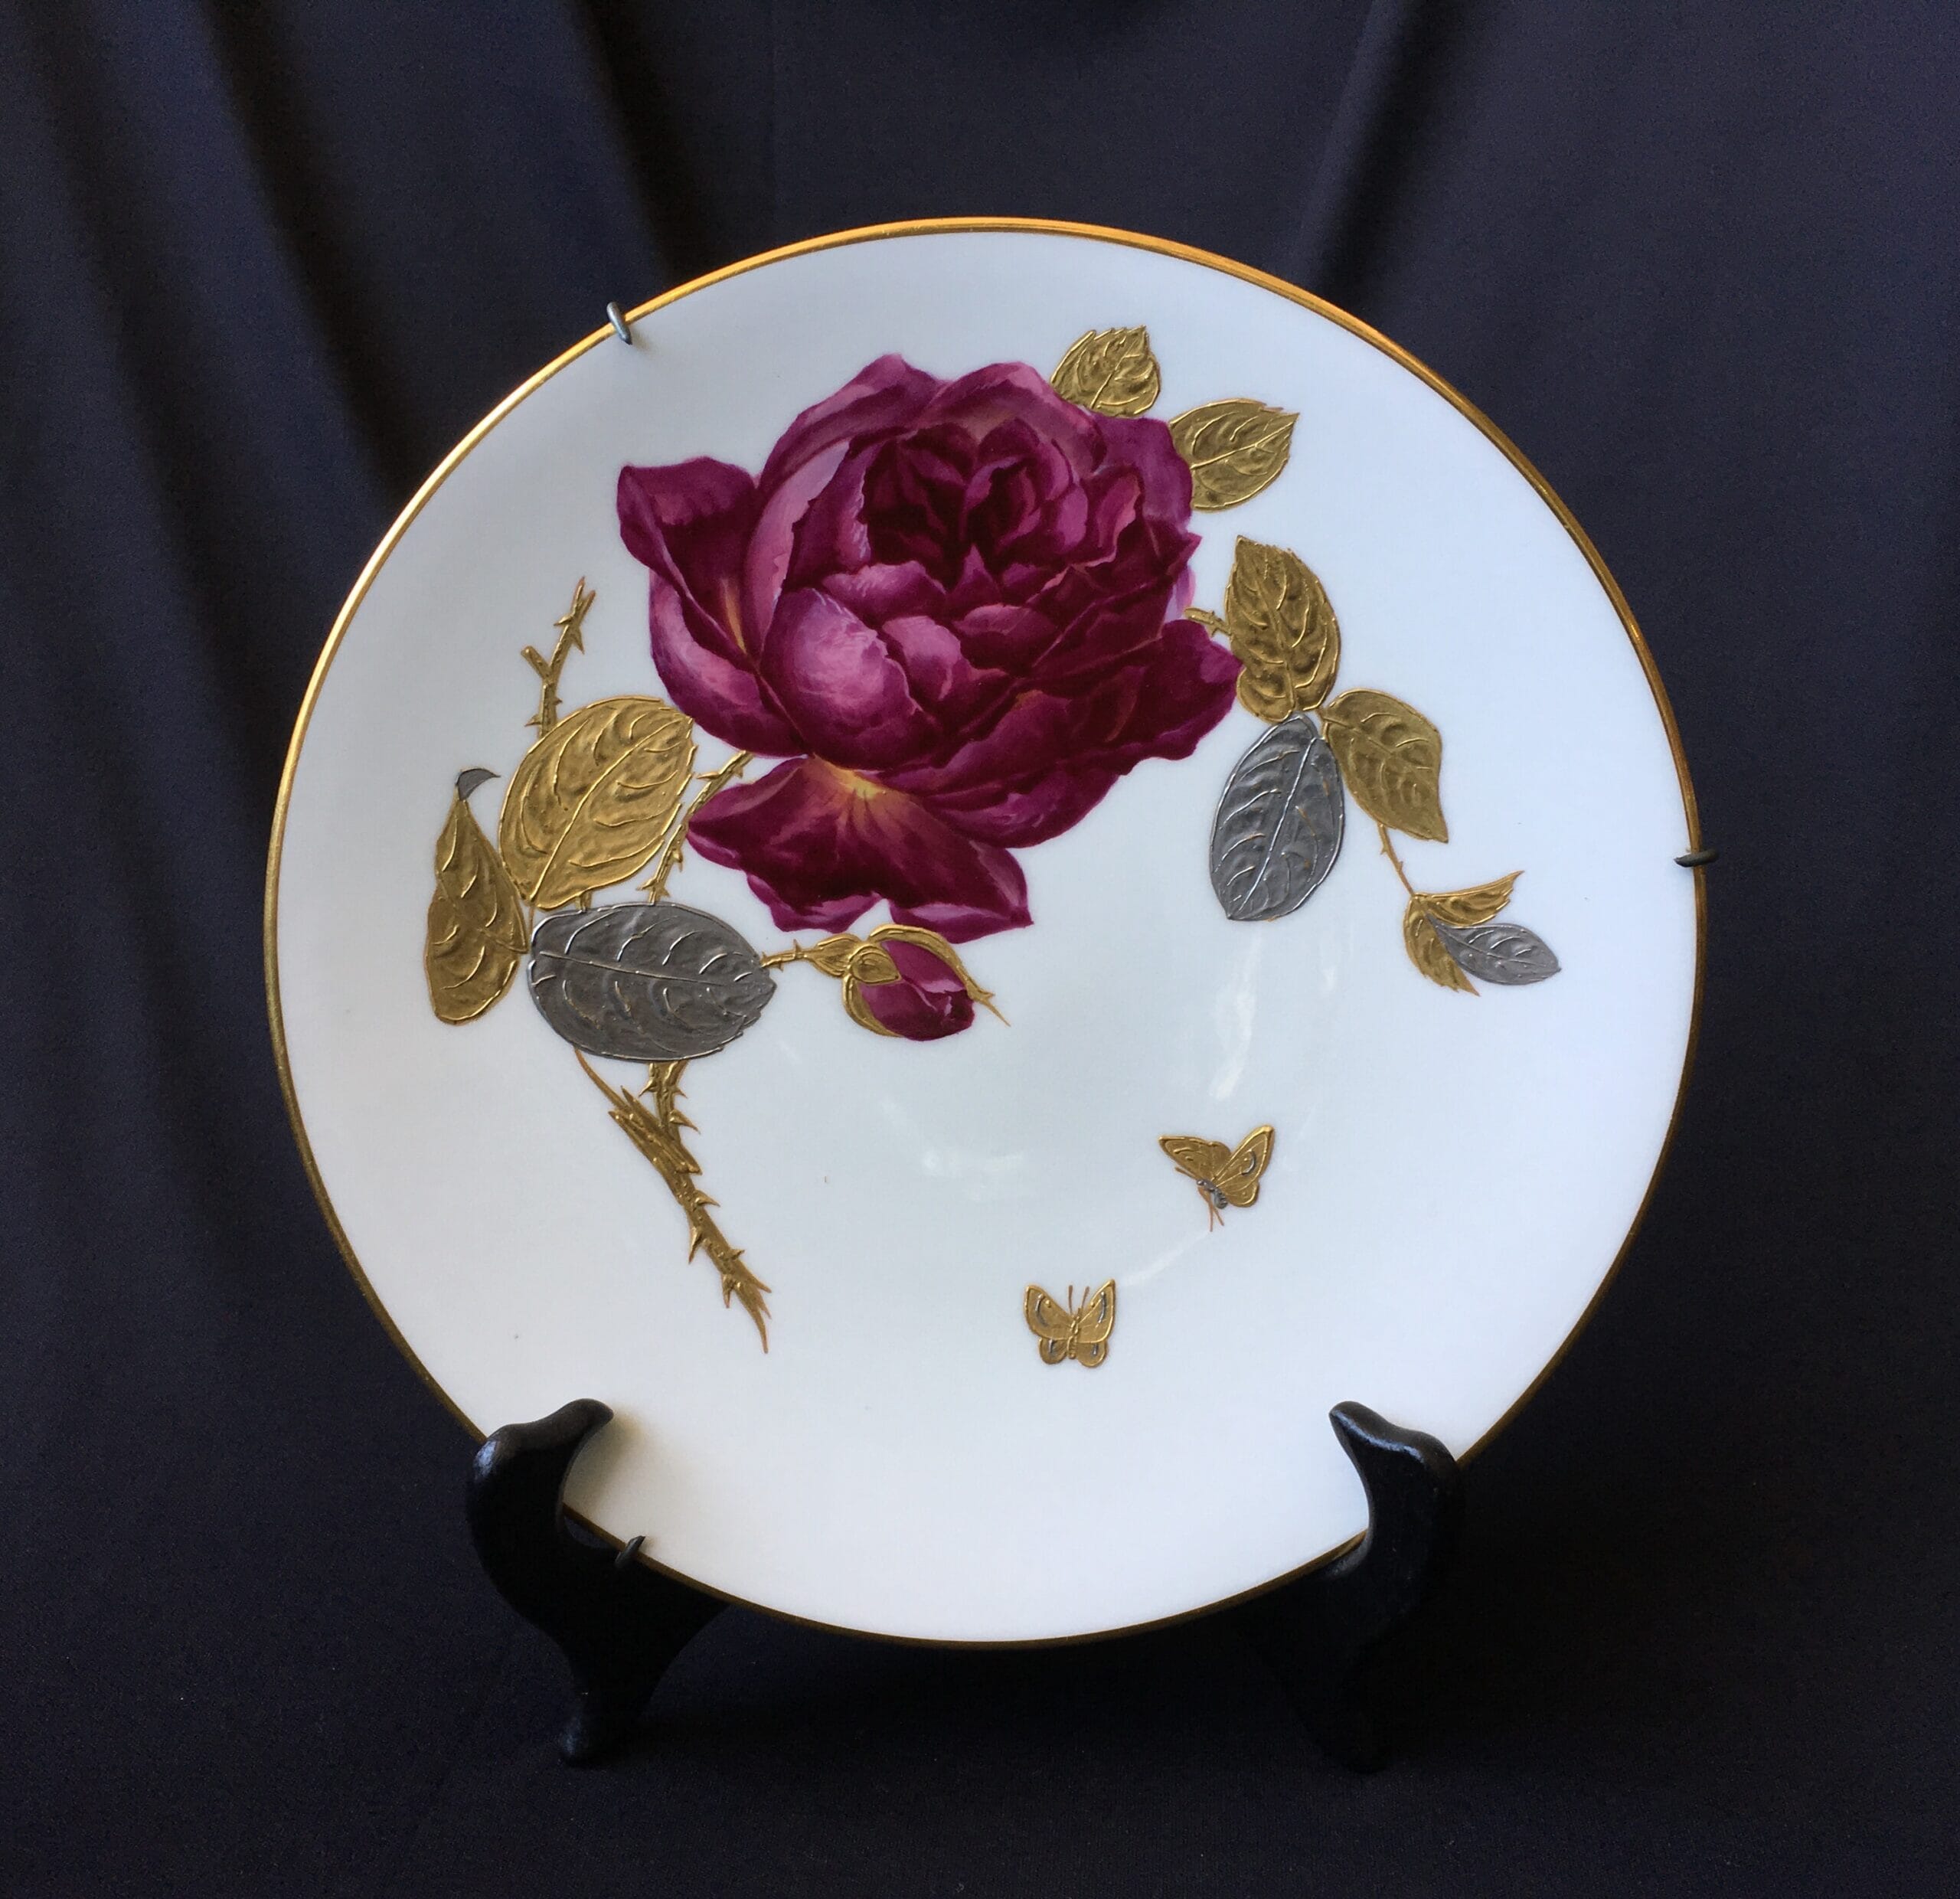 Brown, Westhead, Moore & Co plate with platinum & gold roses, & butterflies, c. 1870-0